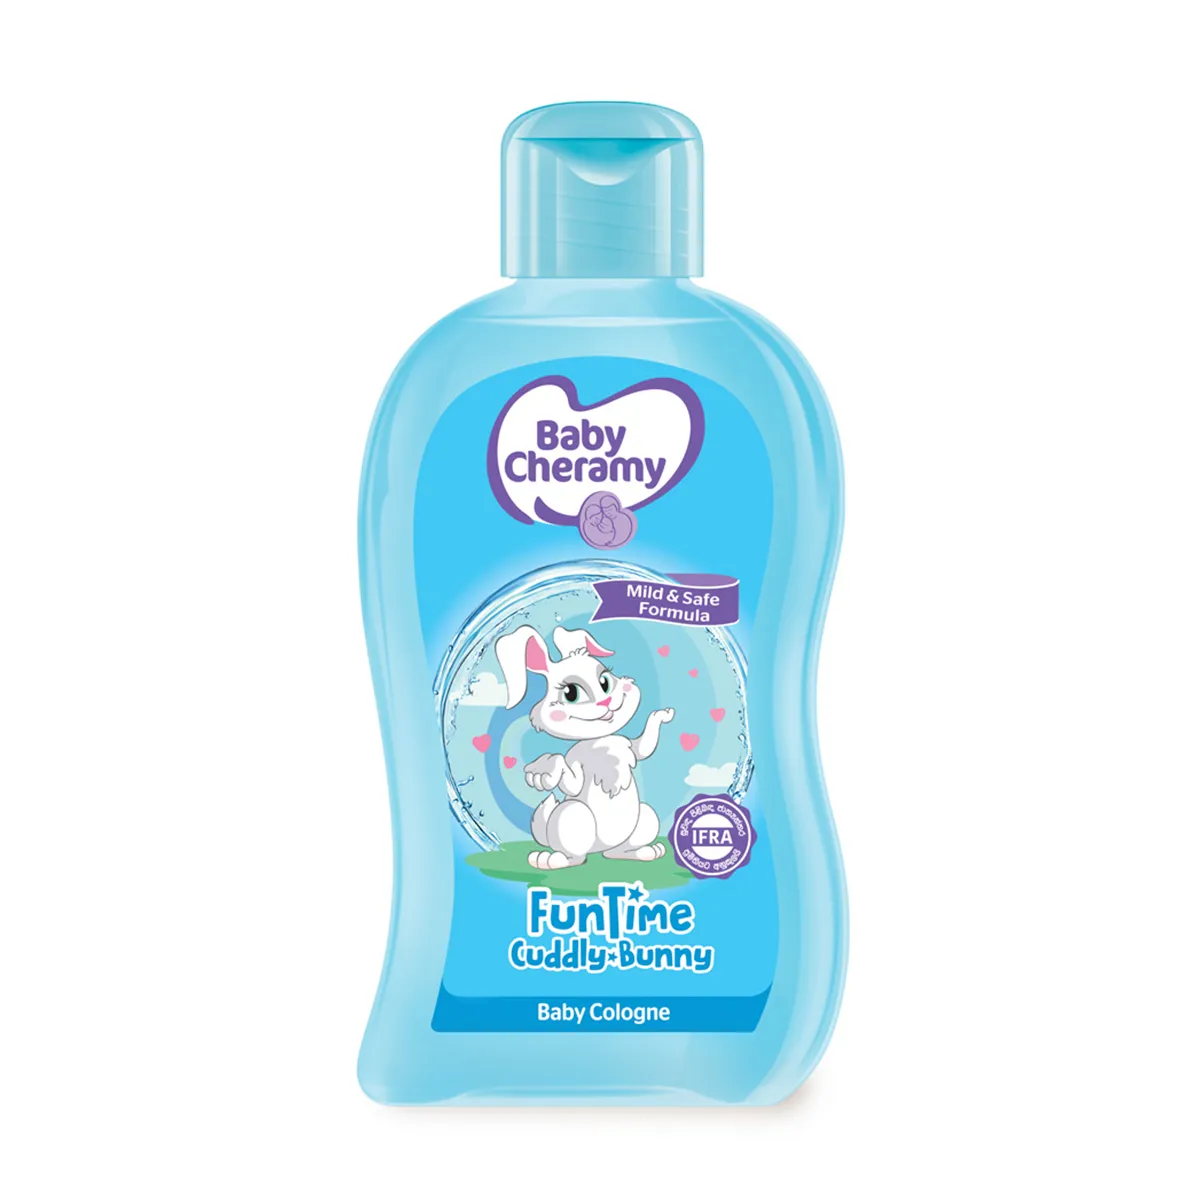 First product image of Baby Cheramy Funtime Cologne Cuddly Bunny 100ml